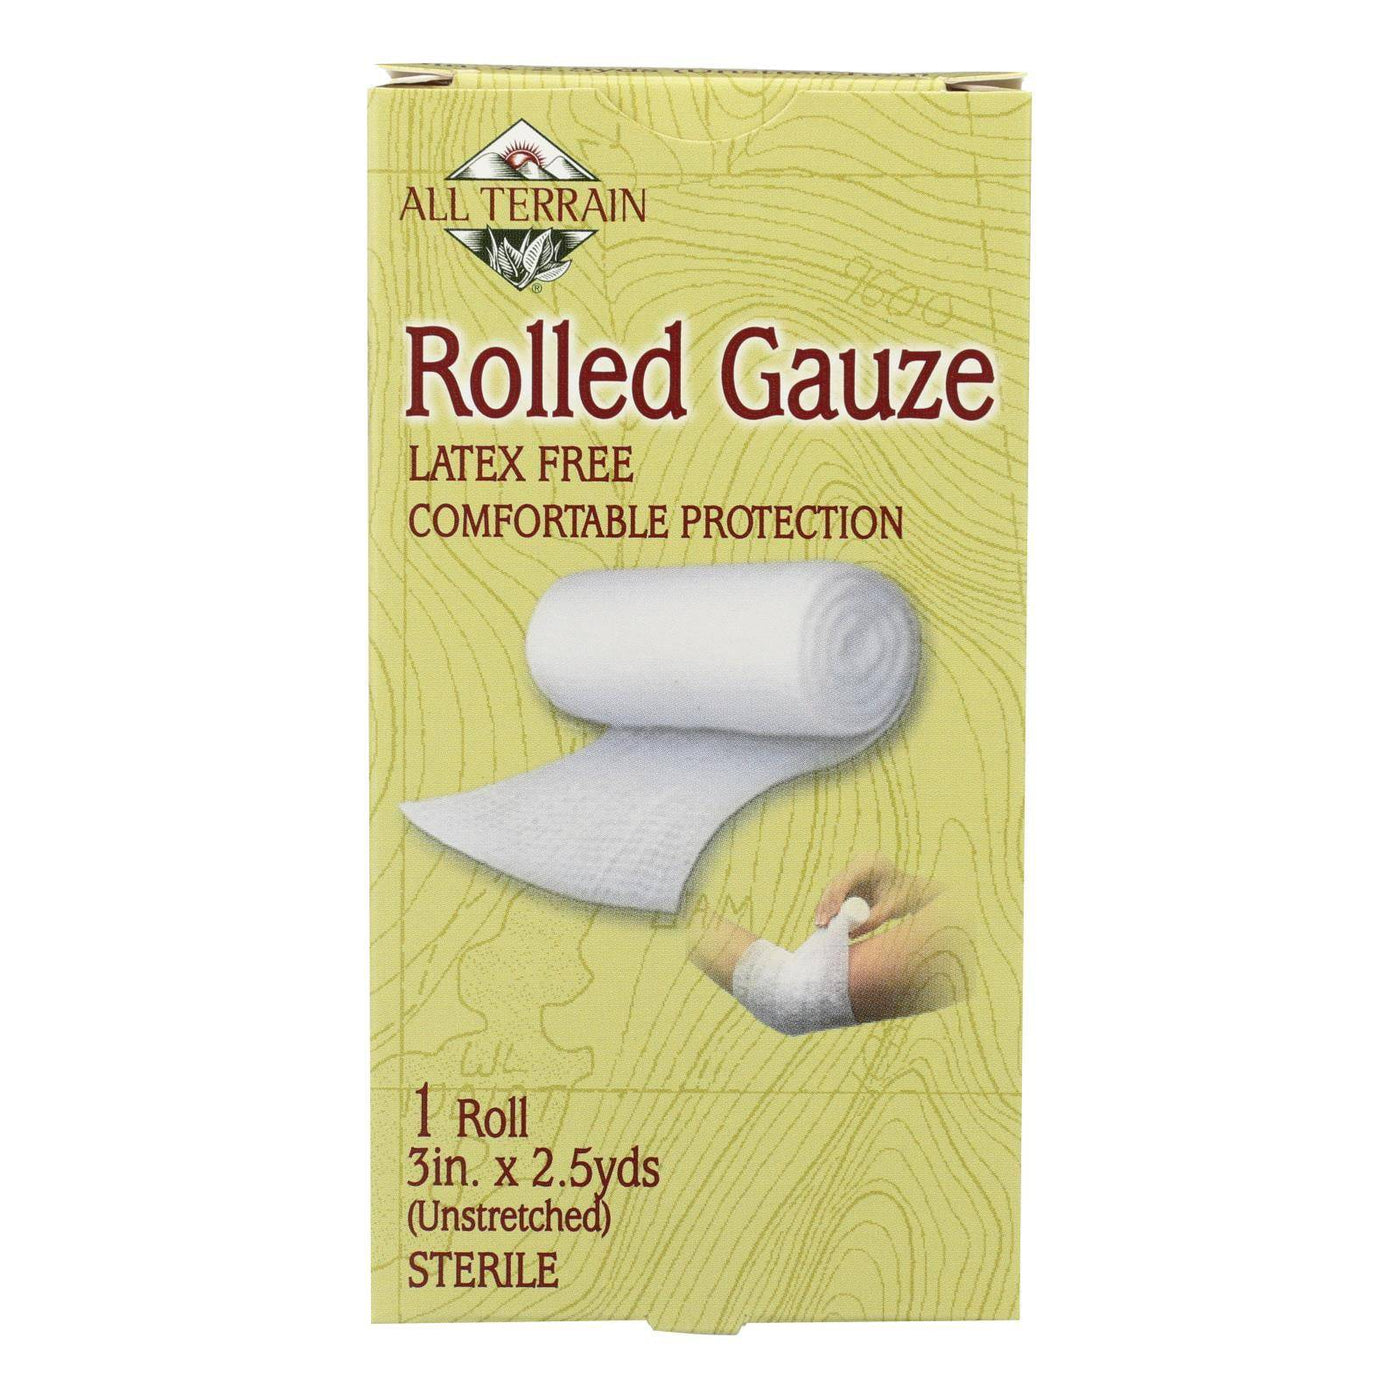 All Terrain - Gauze - Rolled - 3 Inches X 2.5 Yards - 1 Roll | OnlyNaturals.us